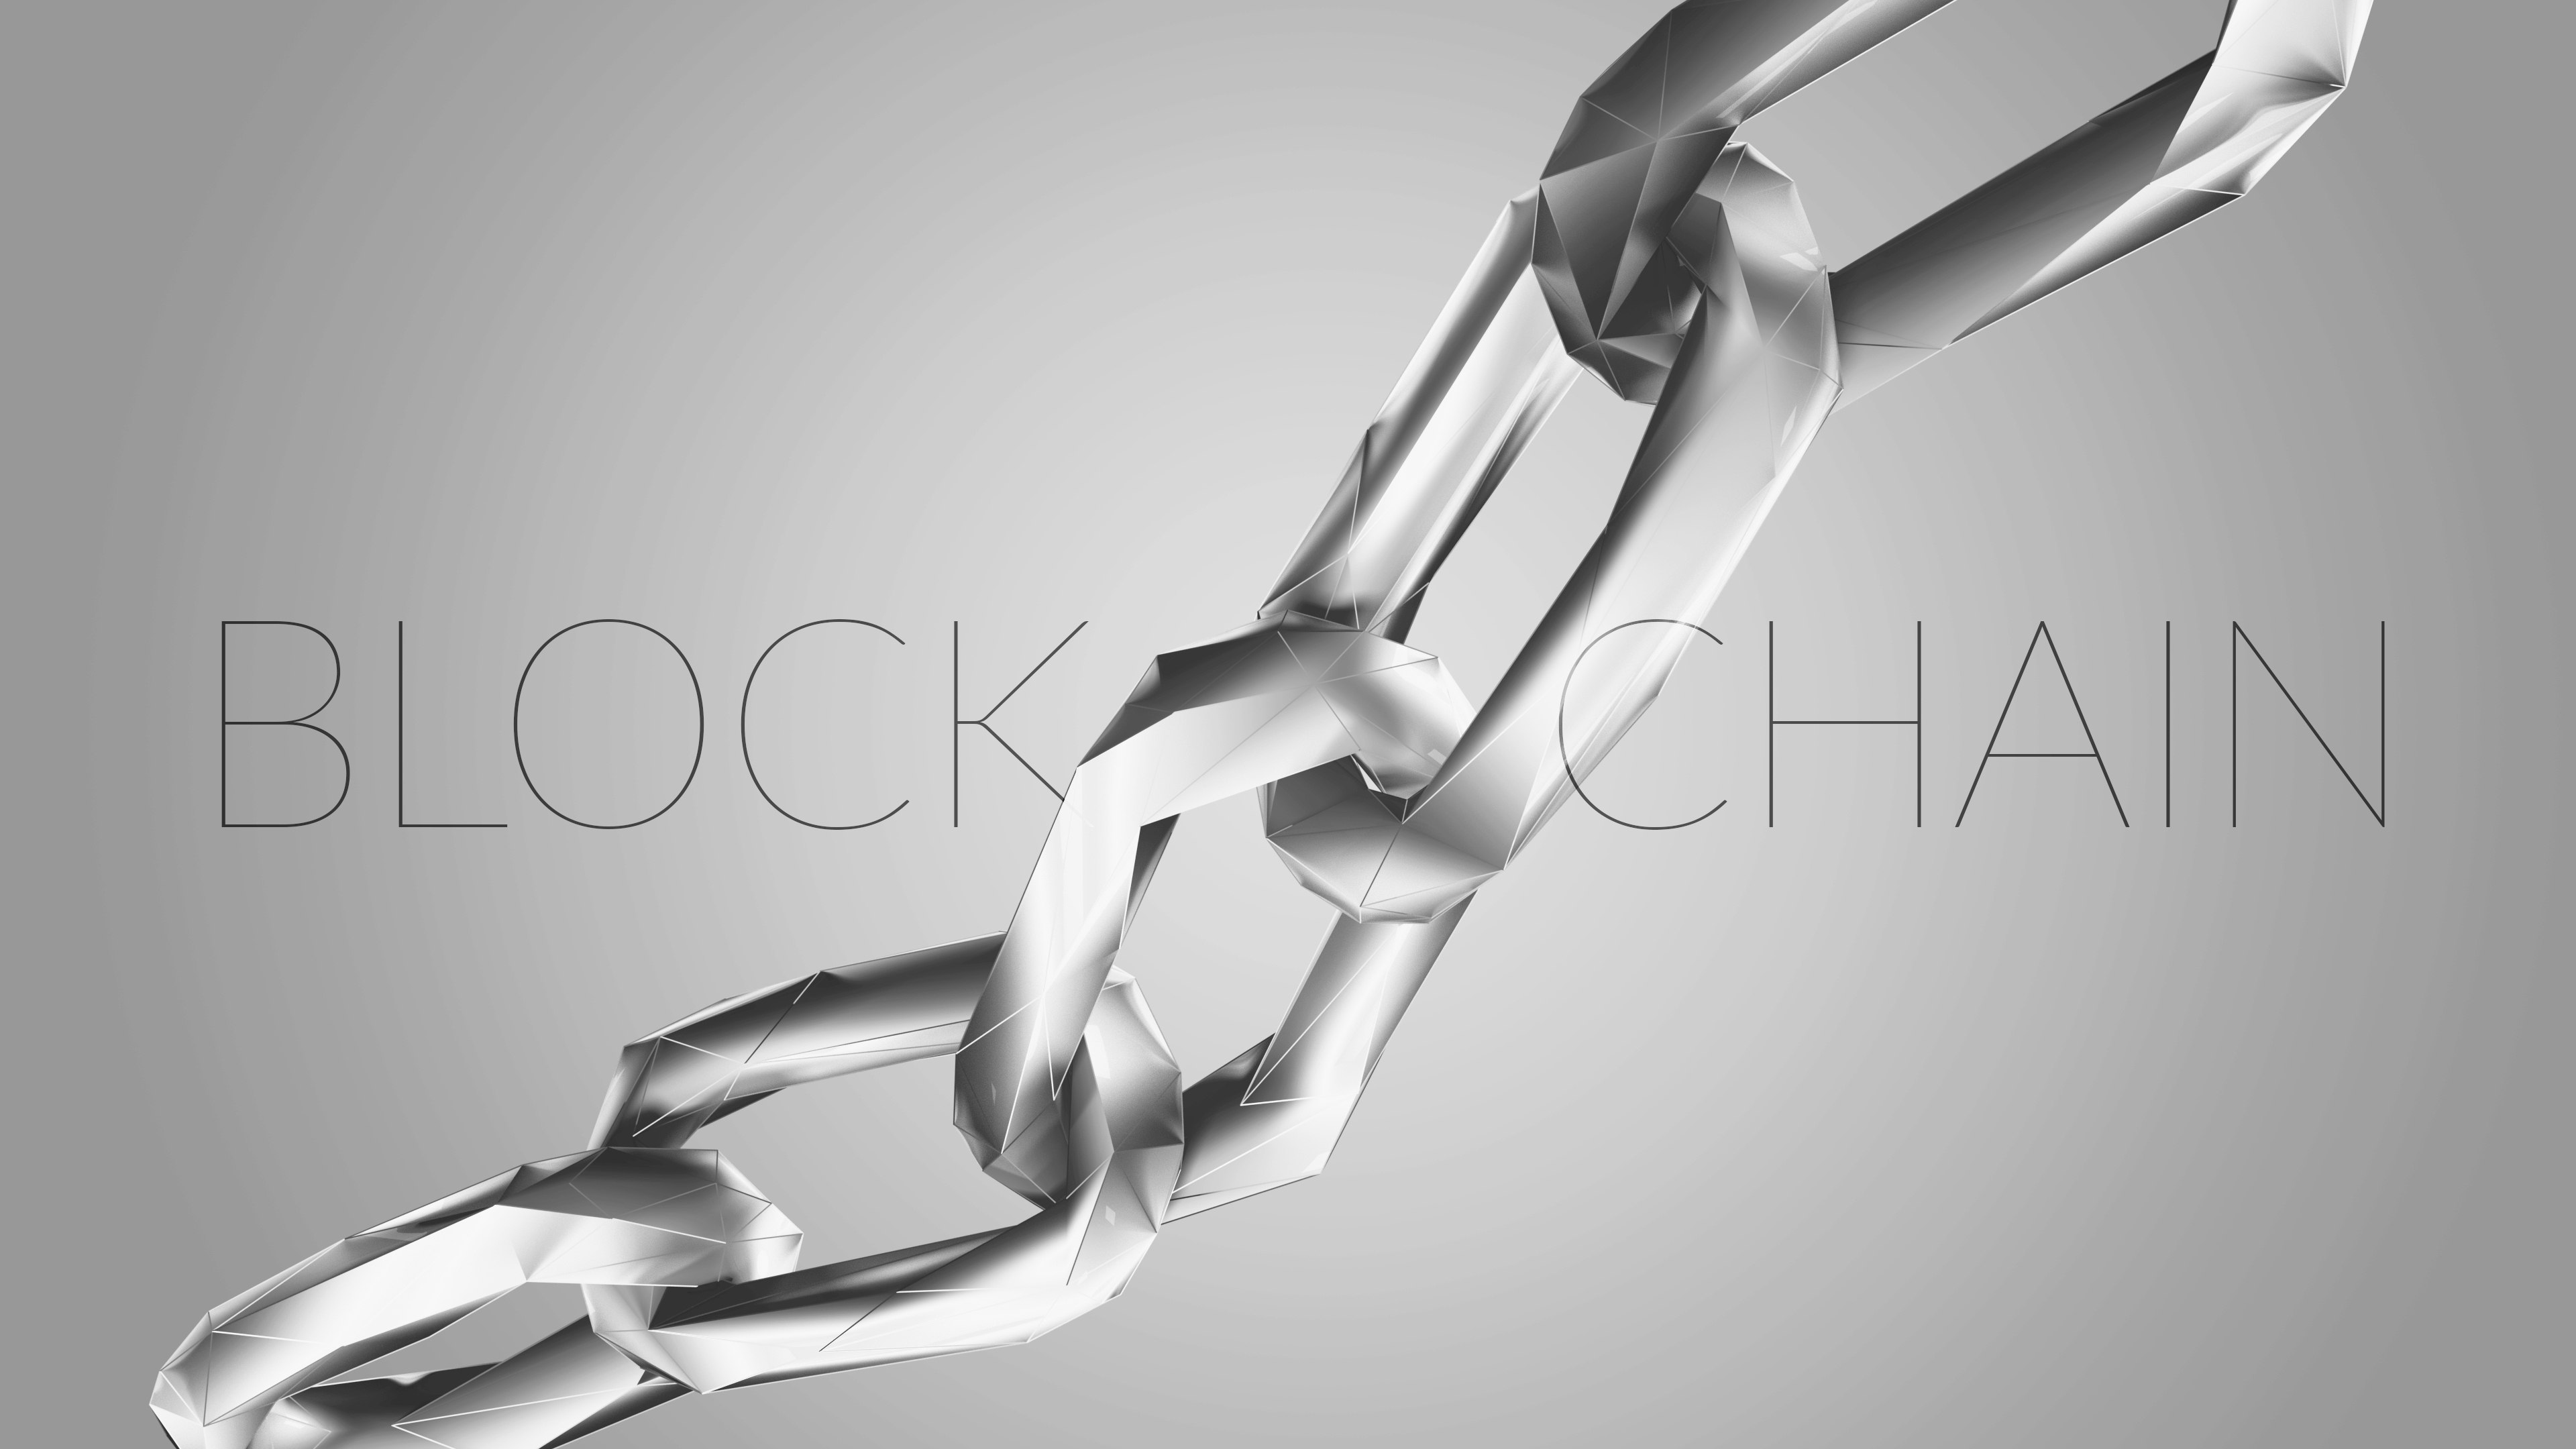 Change Healthcare will enable blockchain transactions - Modern Healthcare Modern Healthcare business news, research, data and events